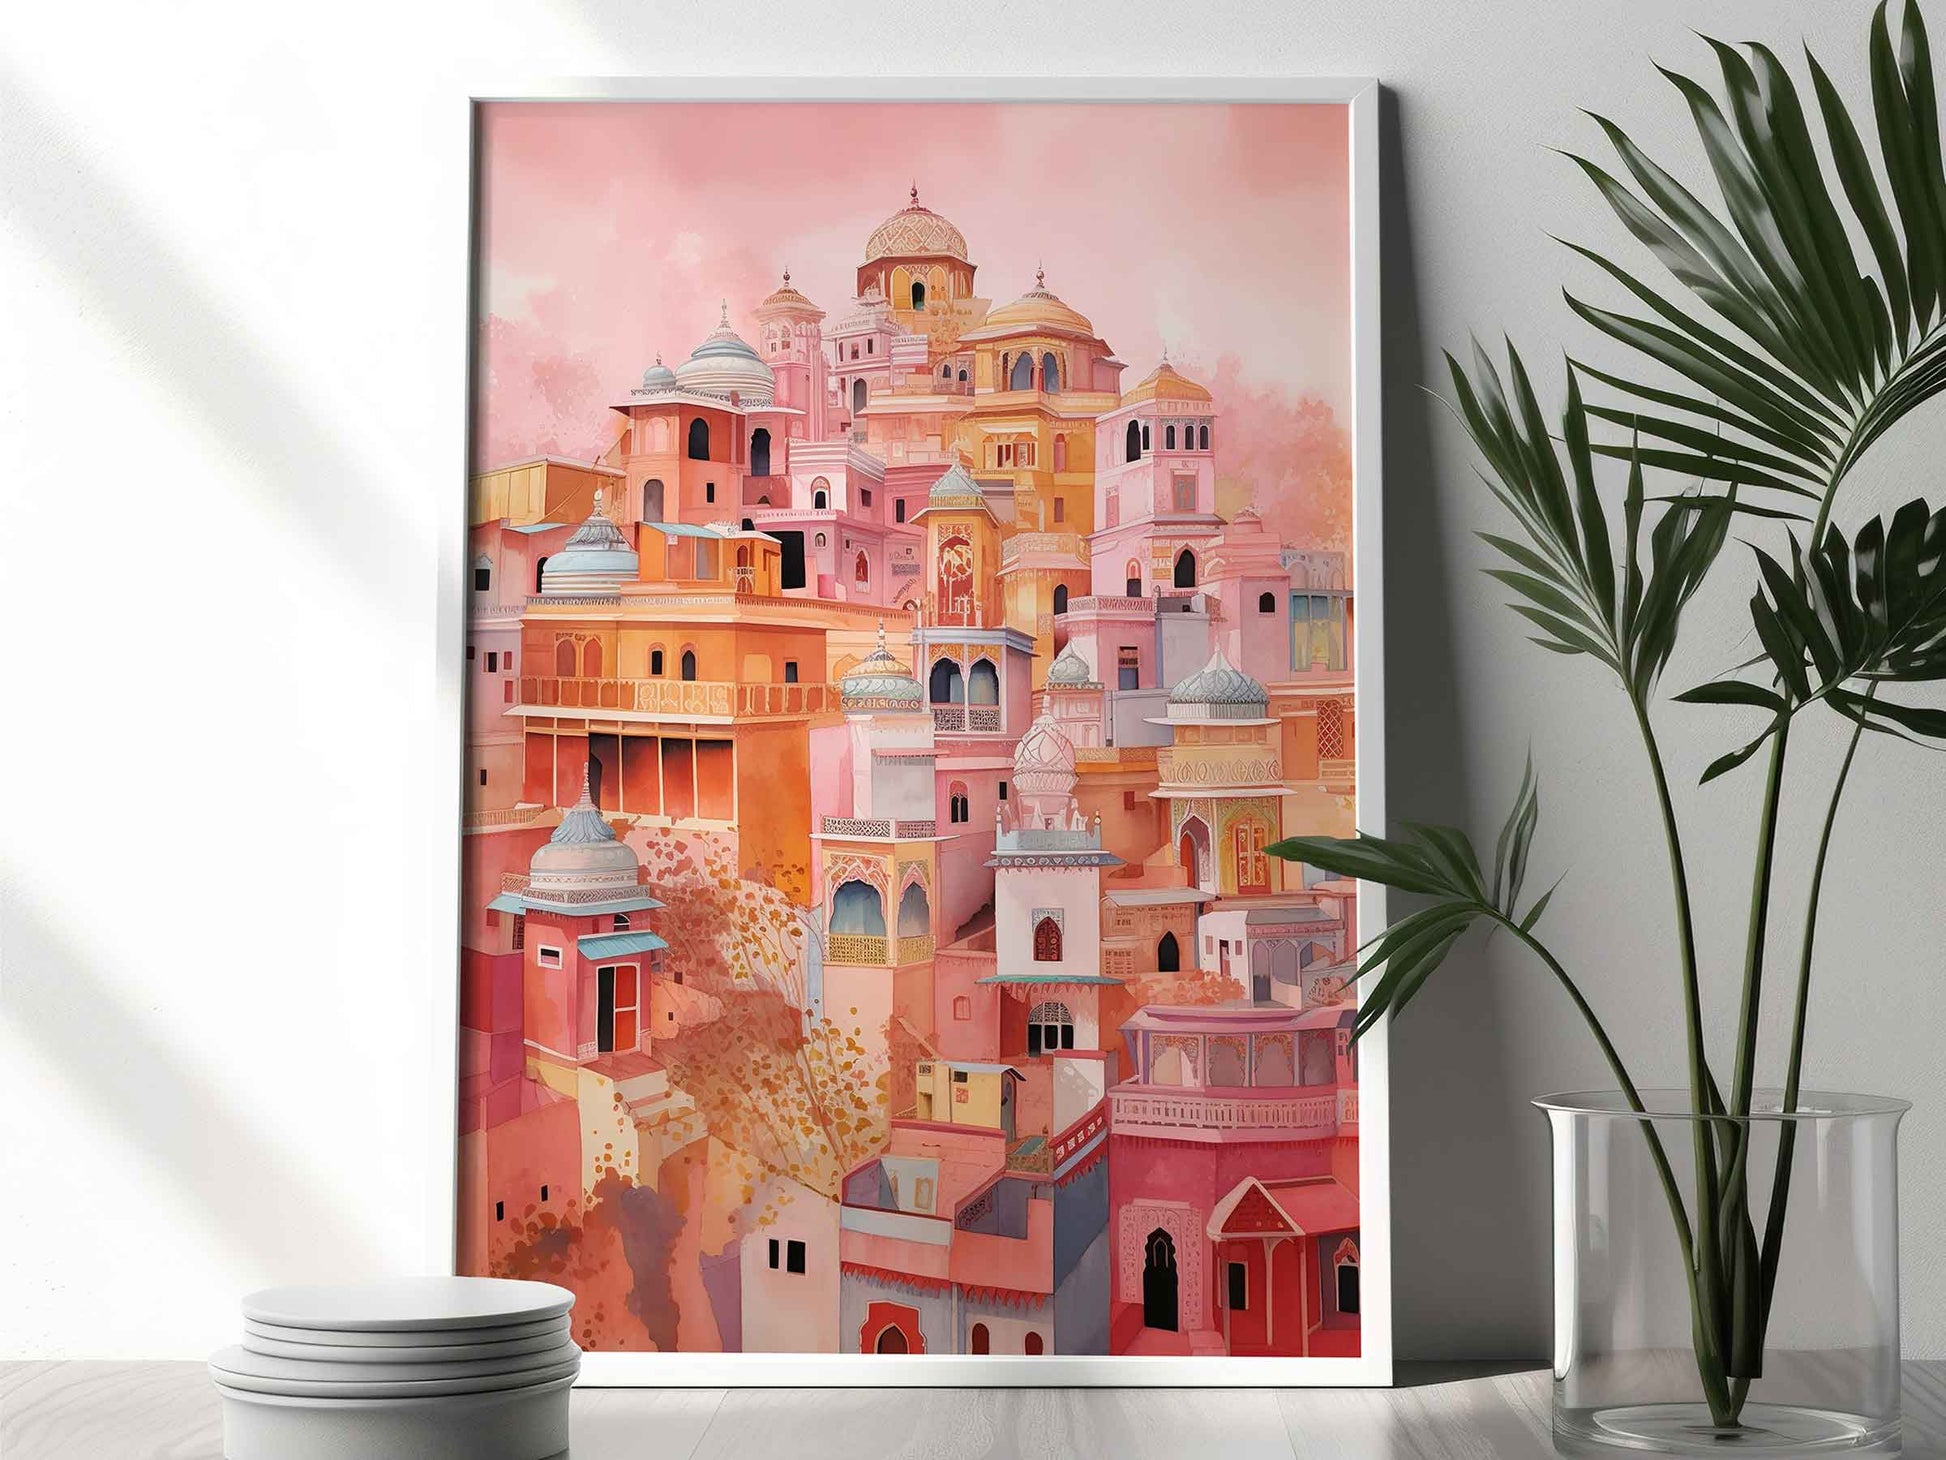 Framed Image of Pink Buildings of Jaipur Colourful Watercolour Wall Art Prints